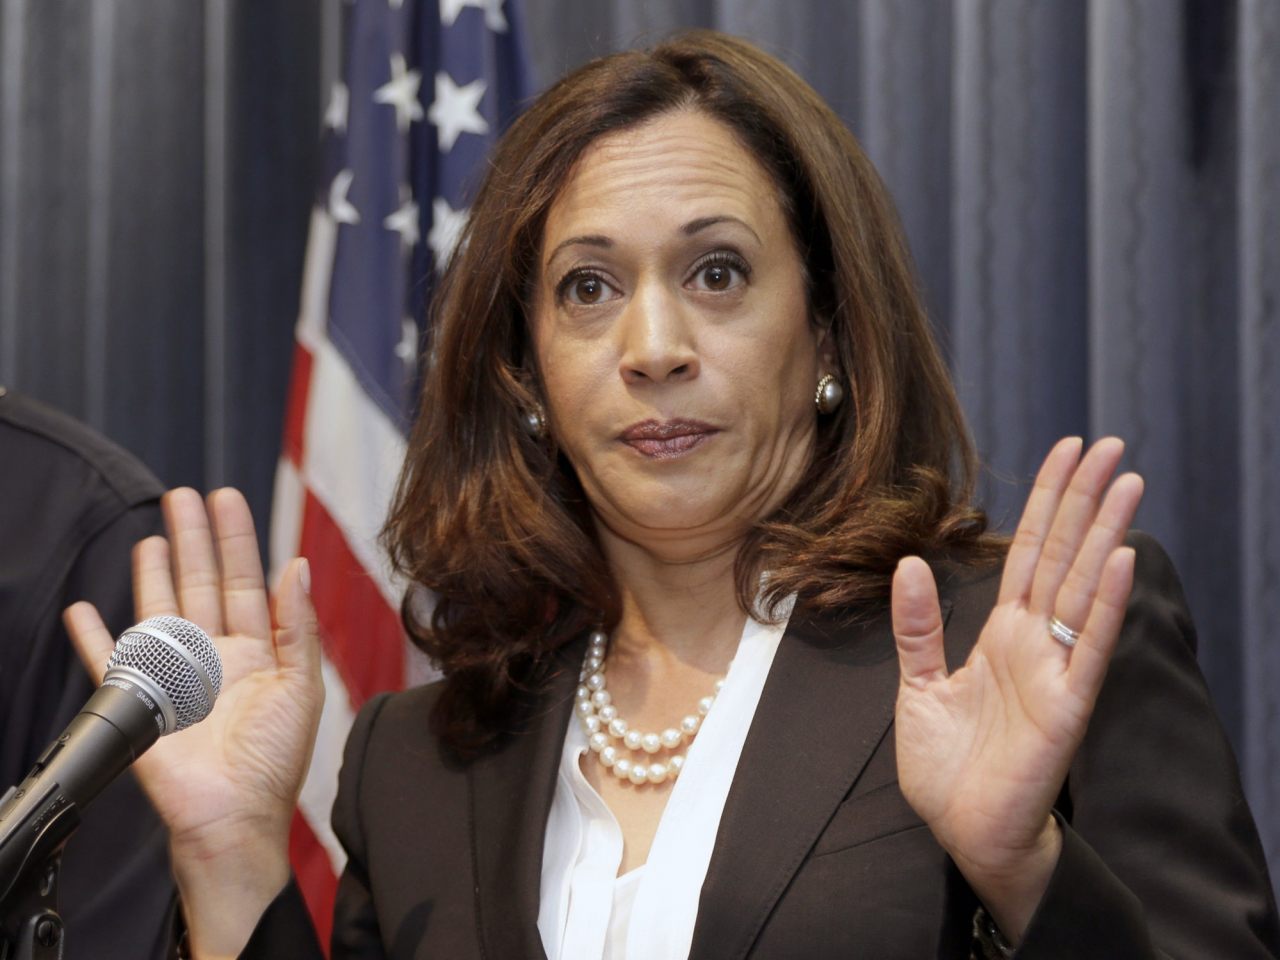 Image: Kamala Harris reveals herself as an anti-Christian BIGOT who hates God and anyone who recognizes the existence of God